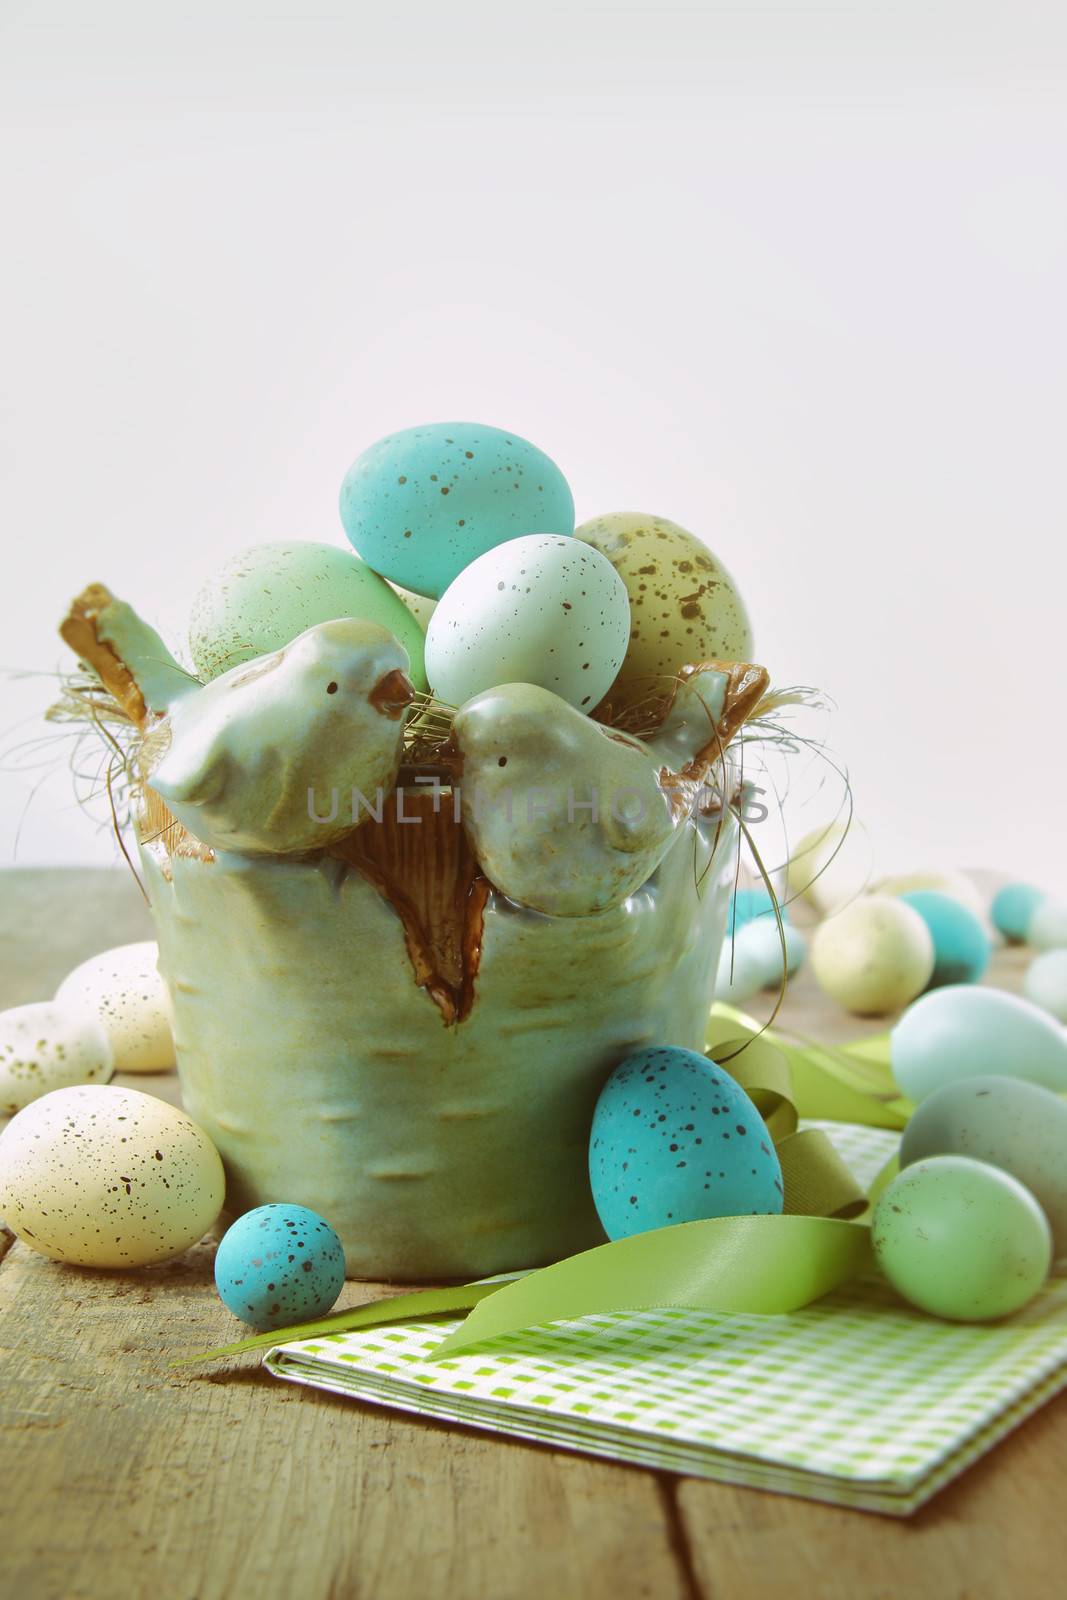 Speckled eggs  in bowl with vintage look by Sandralise